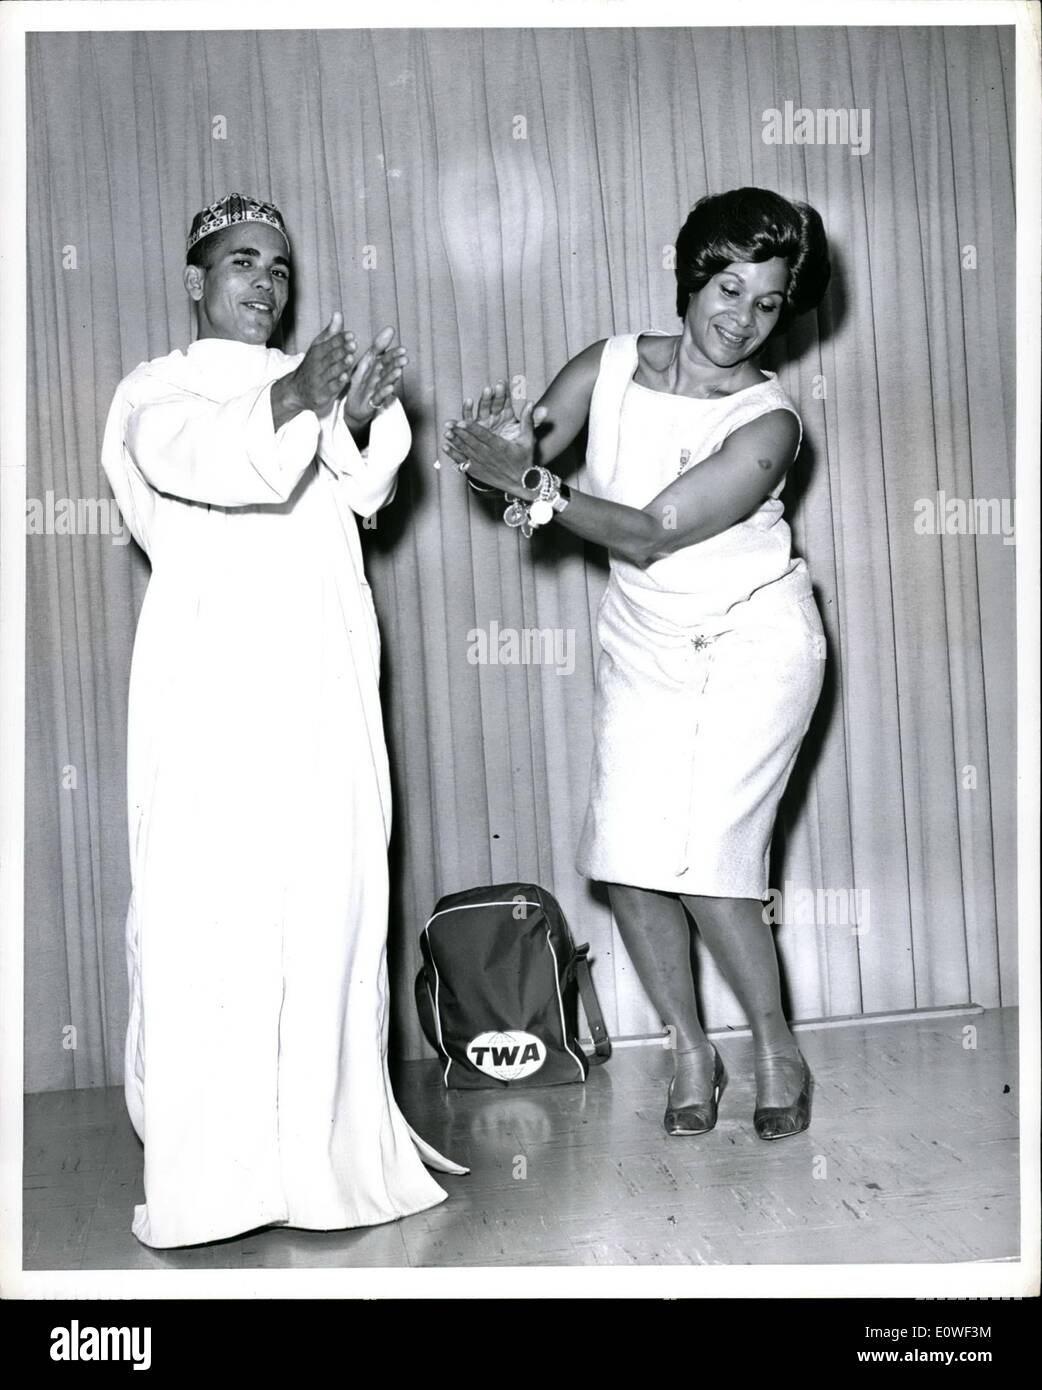 Aug. 08, 1962 - Moroccan Roll: New York International Airport, World famous dancer Katherine Dunbam is shown dancing with 18-year-old Ali Abderrahman, one of the fourteen Royal Dancers from the Court of Morocco who arrived by TWA Super Jet from Paris. The troupe came to the U.S. after ten years of negotiations by Miss Dunham with King Hassan II of Morocco, and will tour the U.S. in a new show with her for thirty-eight weeks. Stock Photo